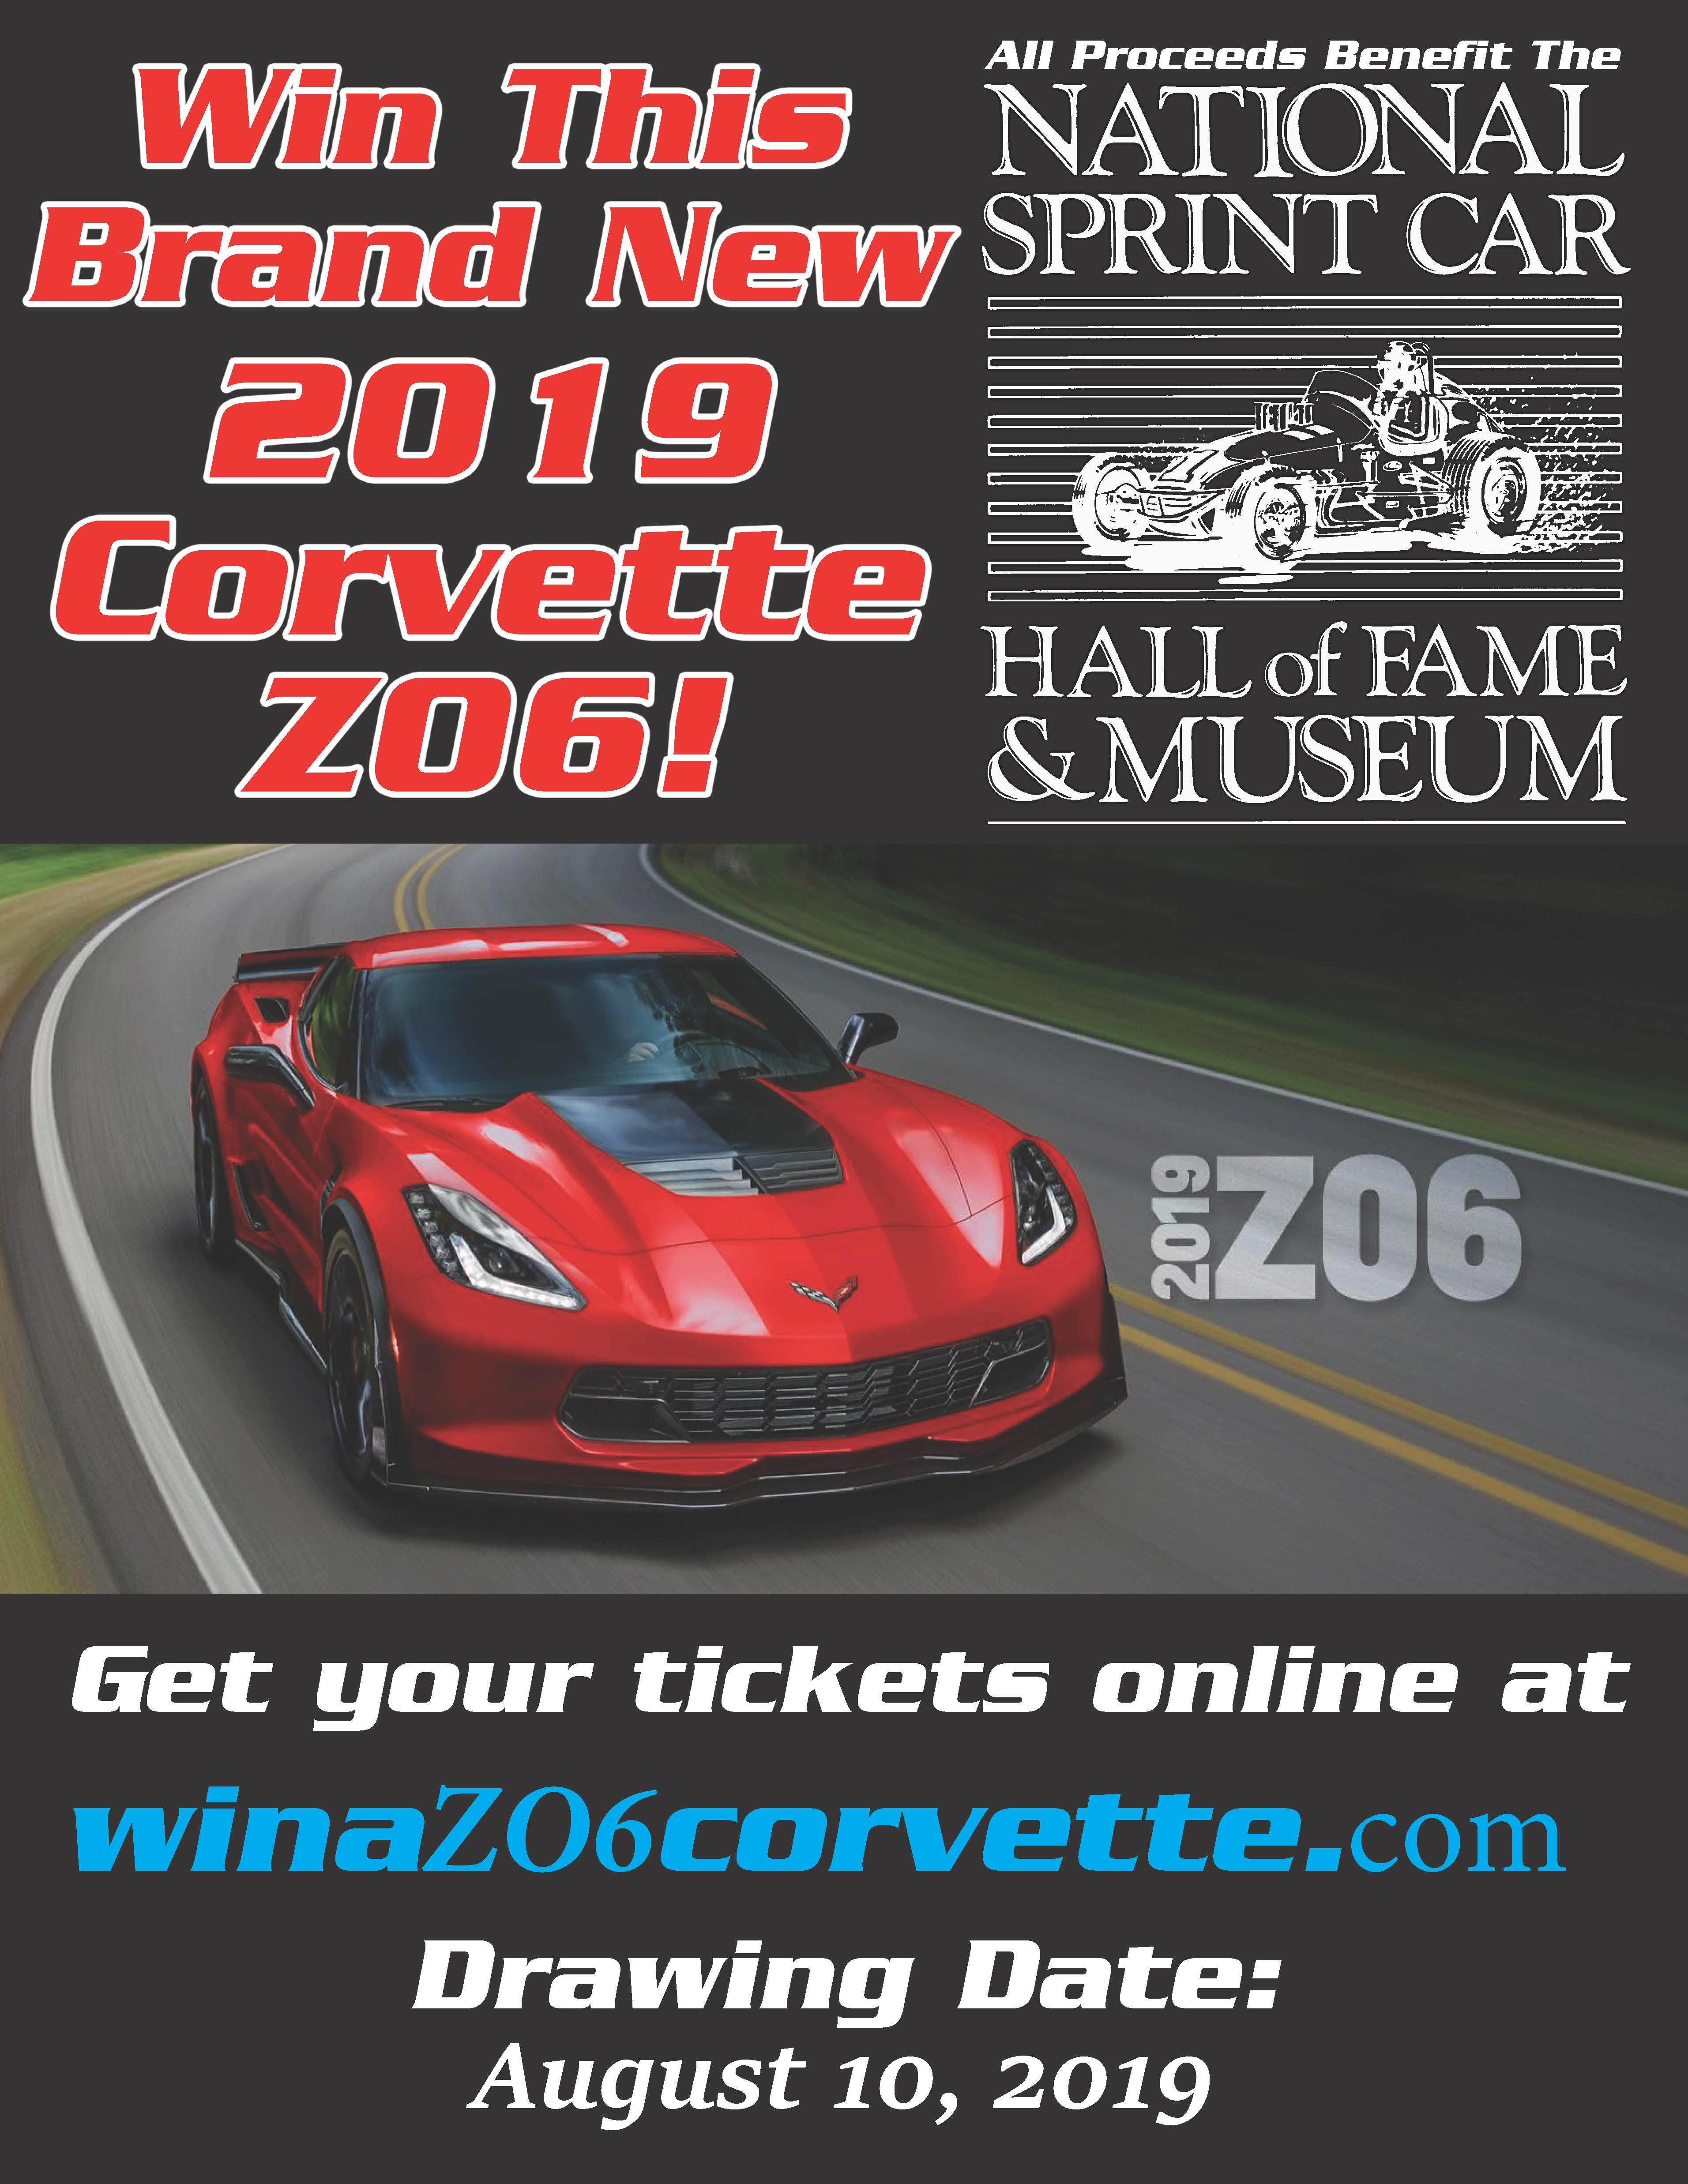 Win a Brand New 2019 Corvette ZO6 Through the National Sprint Car Hall of Fame & Museum!